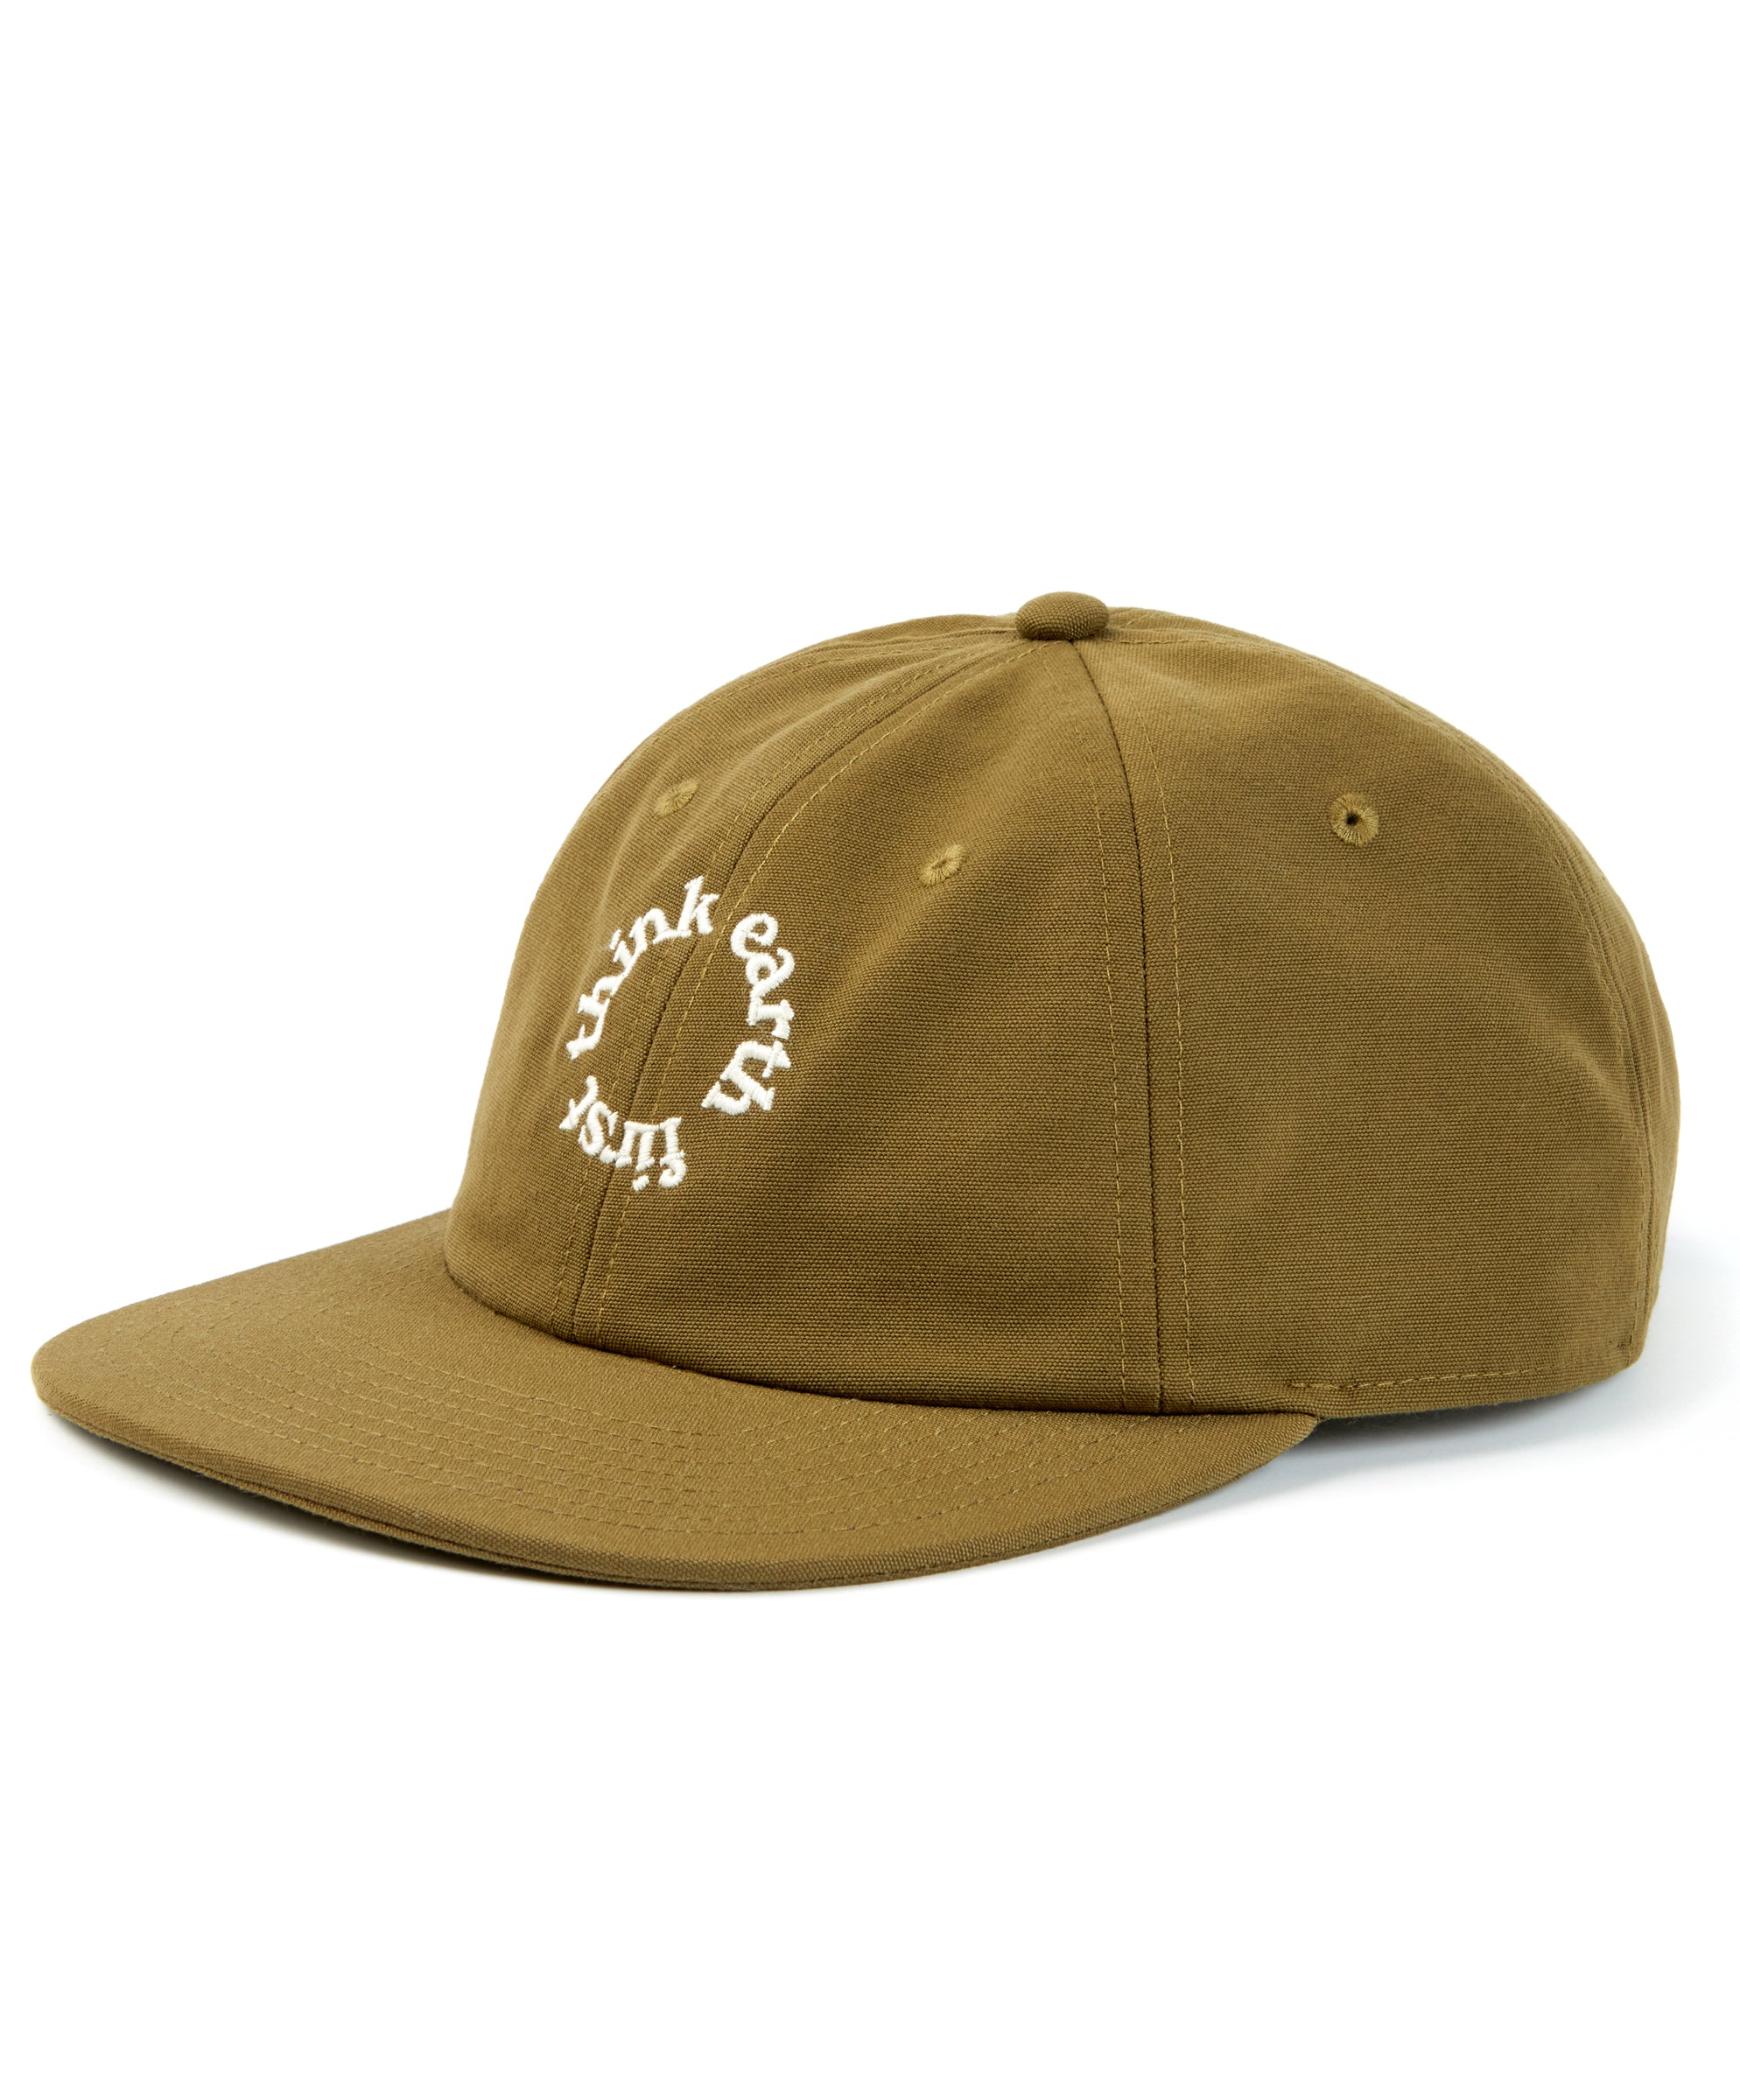 Earth First Camp Hat | Men's Accessories | Outerknown